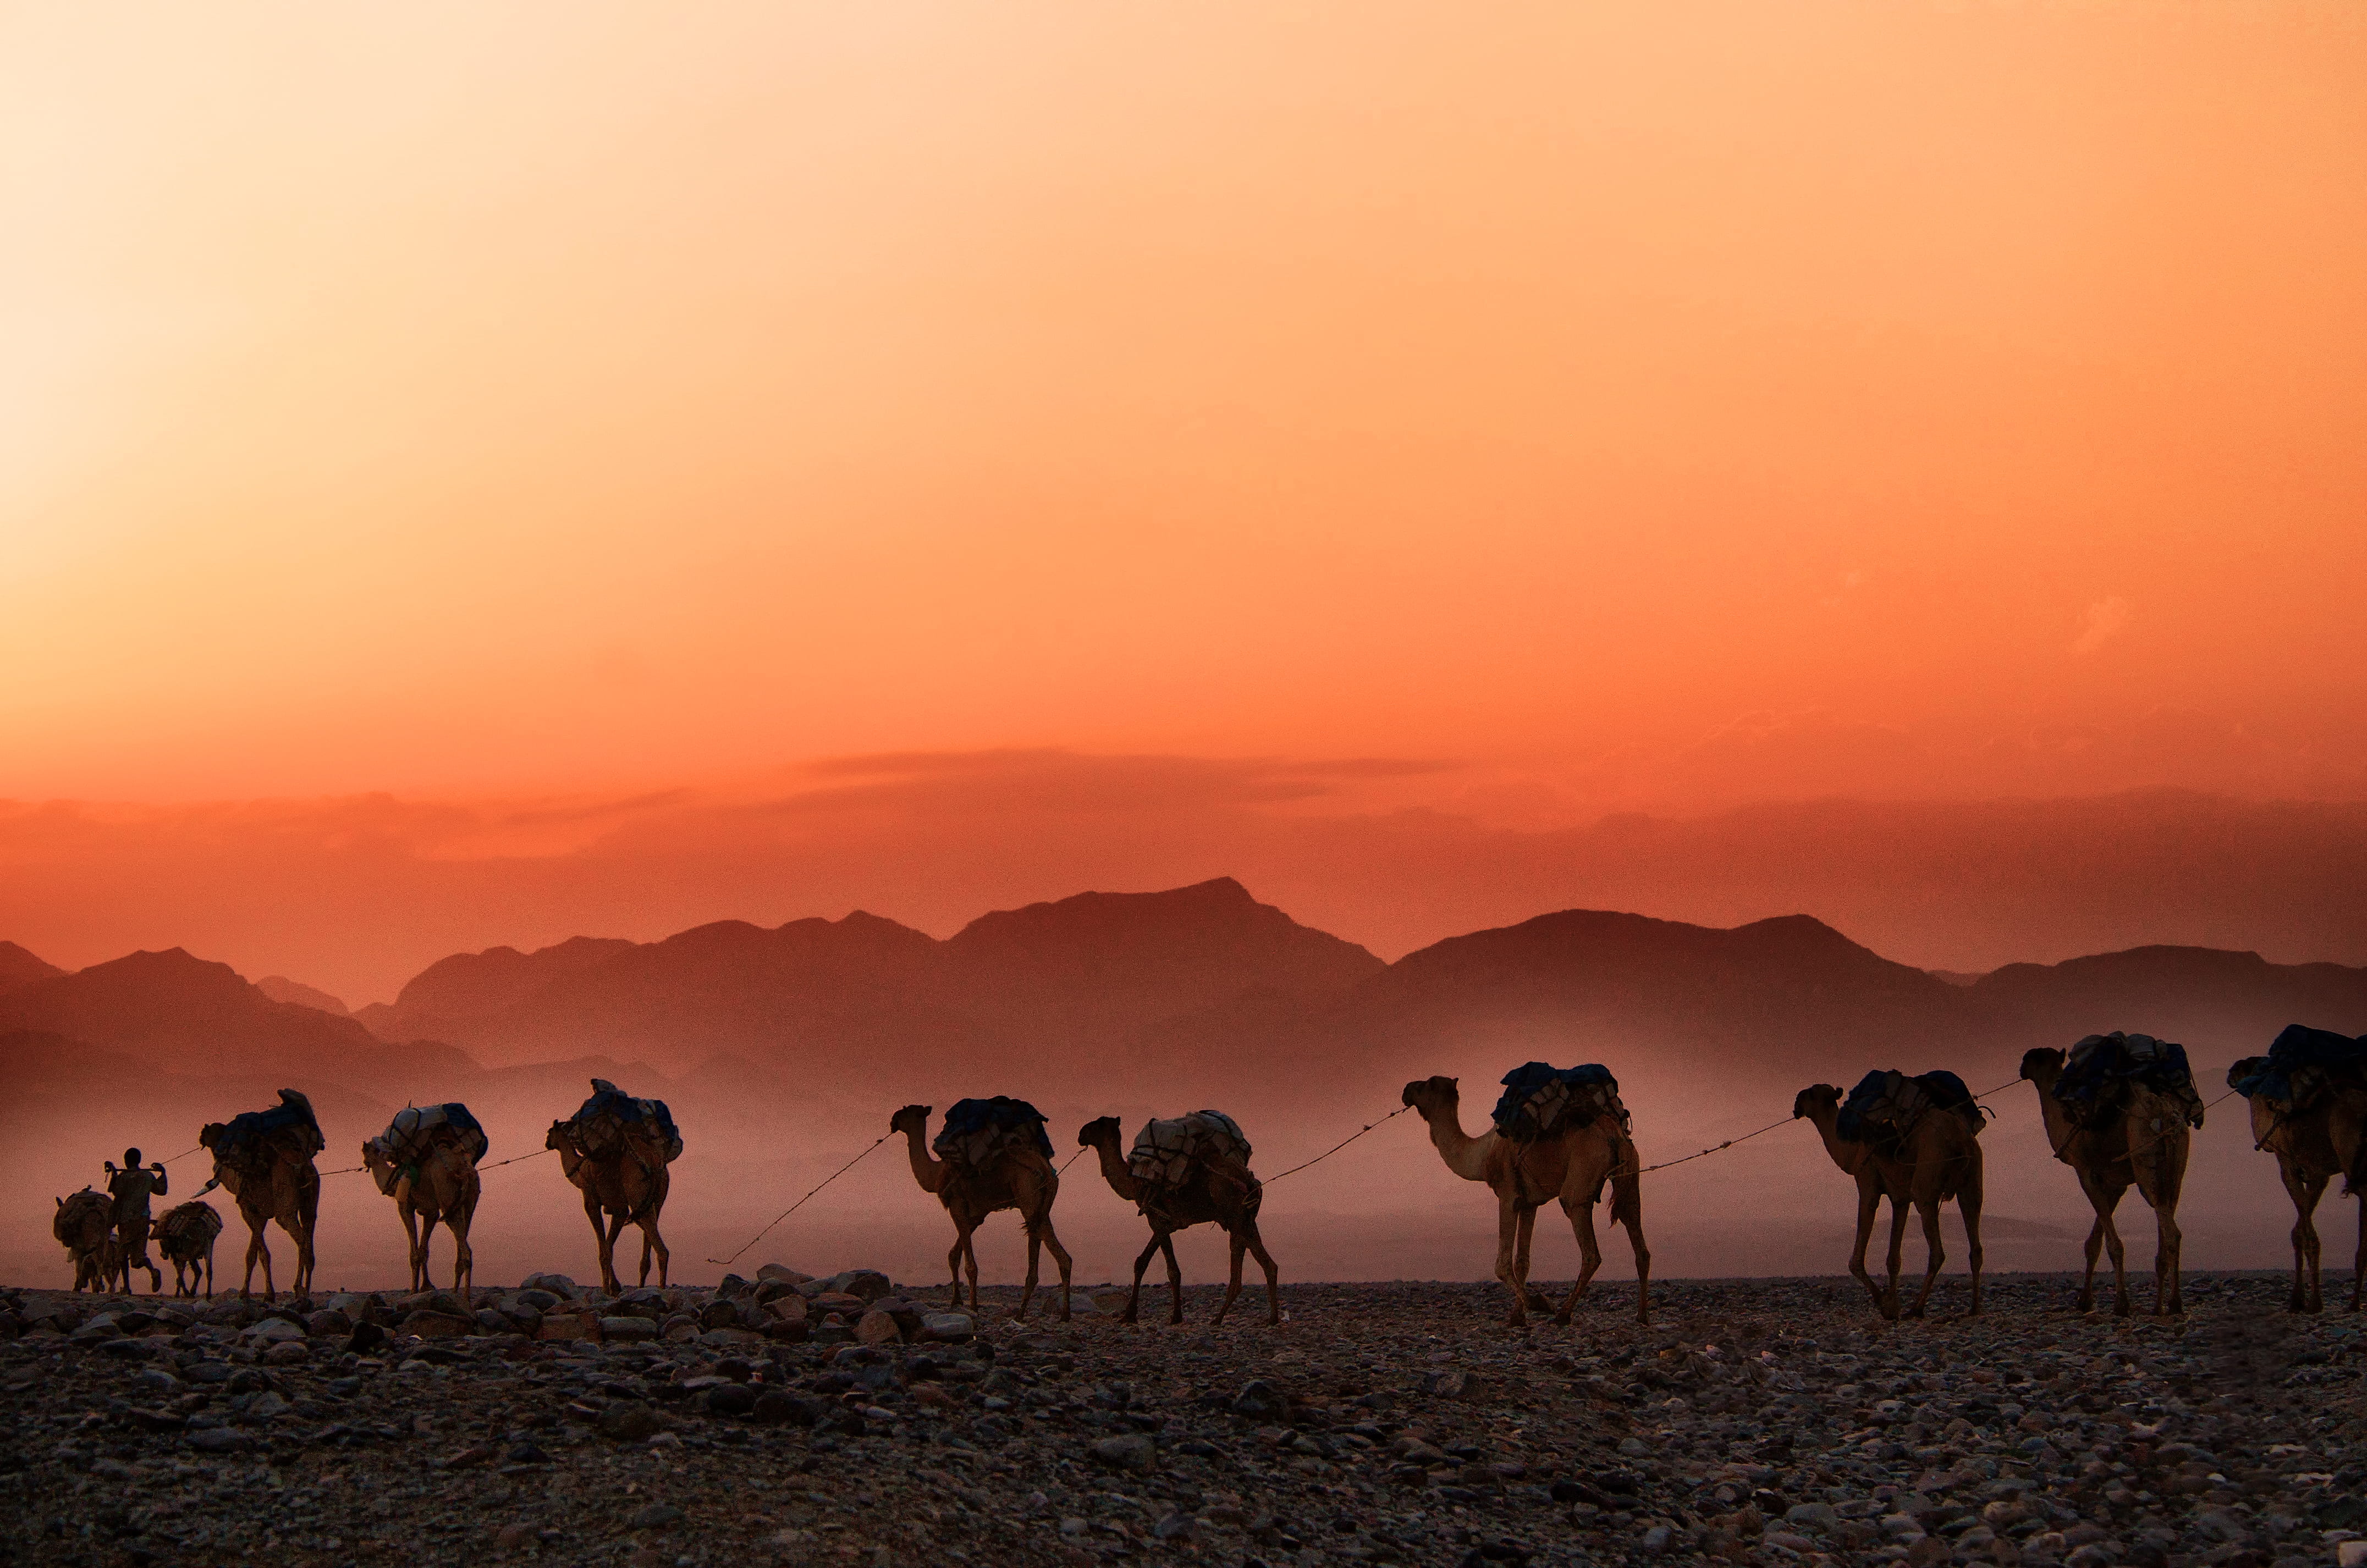 man walking beside parade of camels background of mountain, photo of group of camels